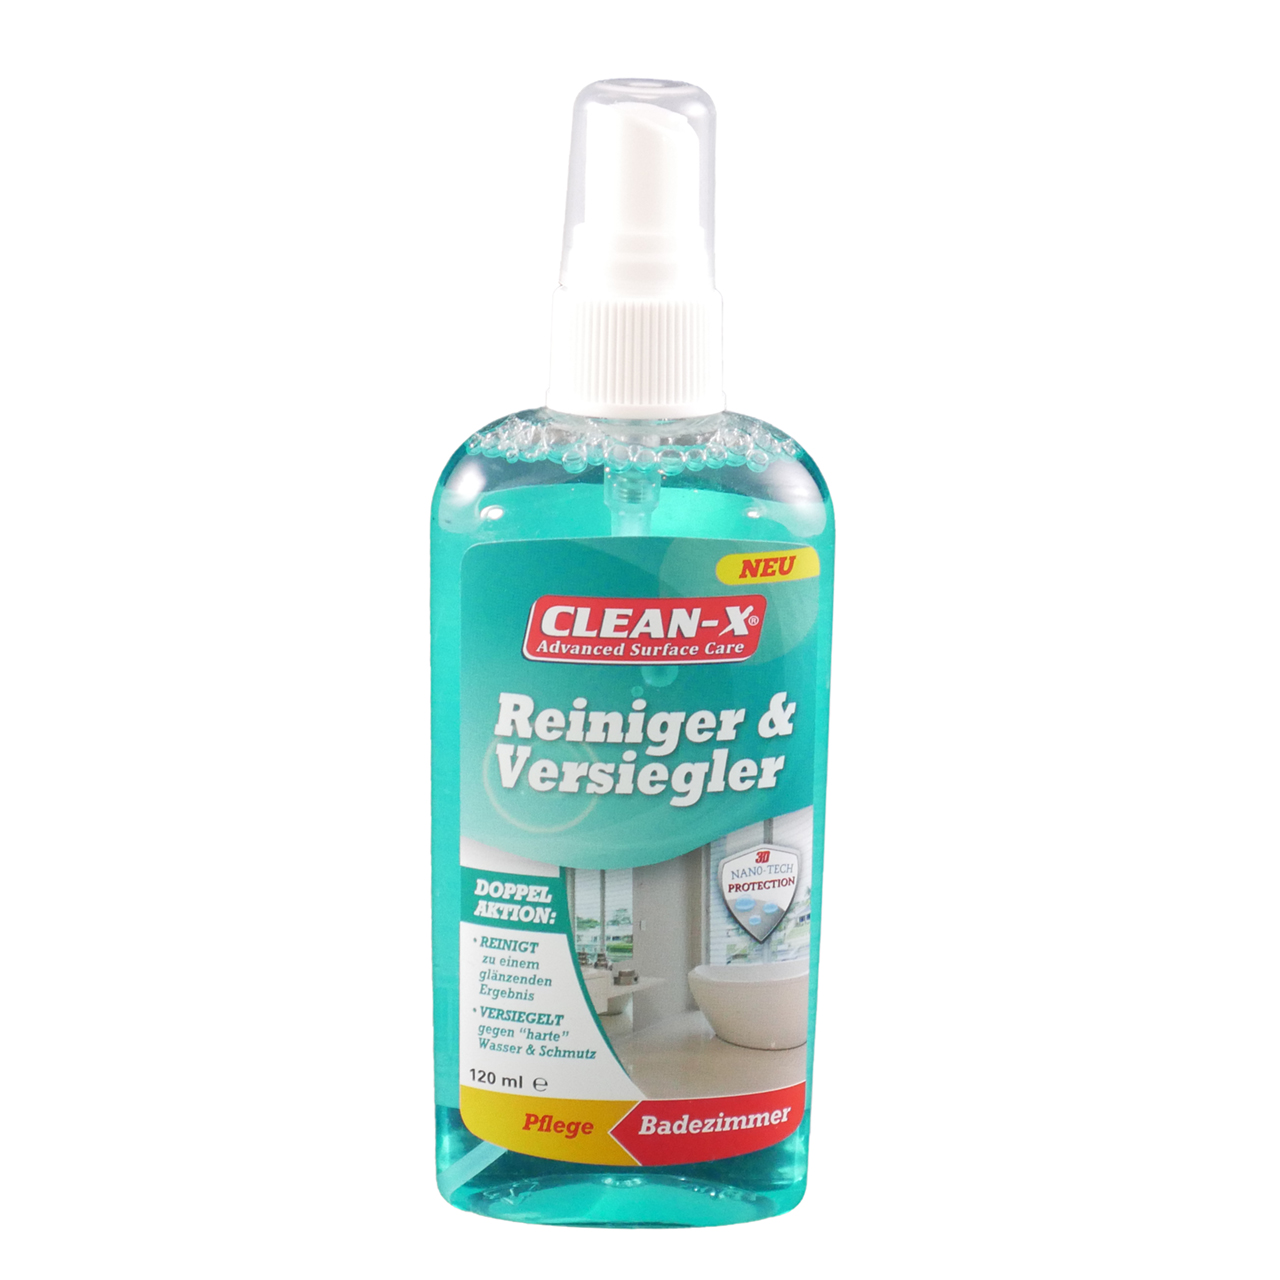 REPEL® Glass- and Surface Cleaner 120ml